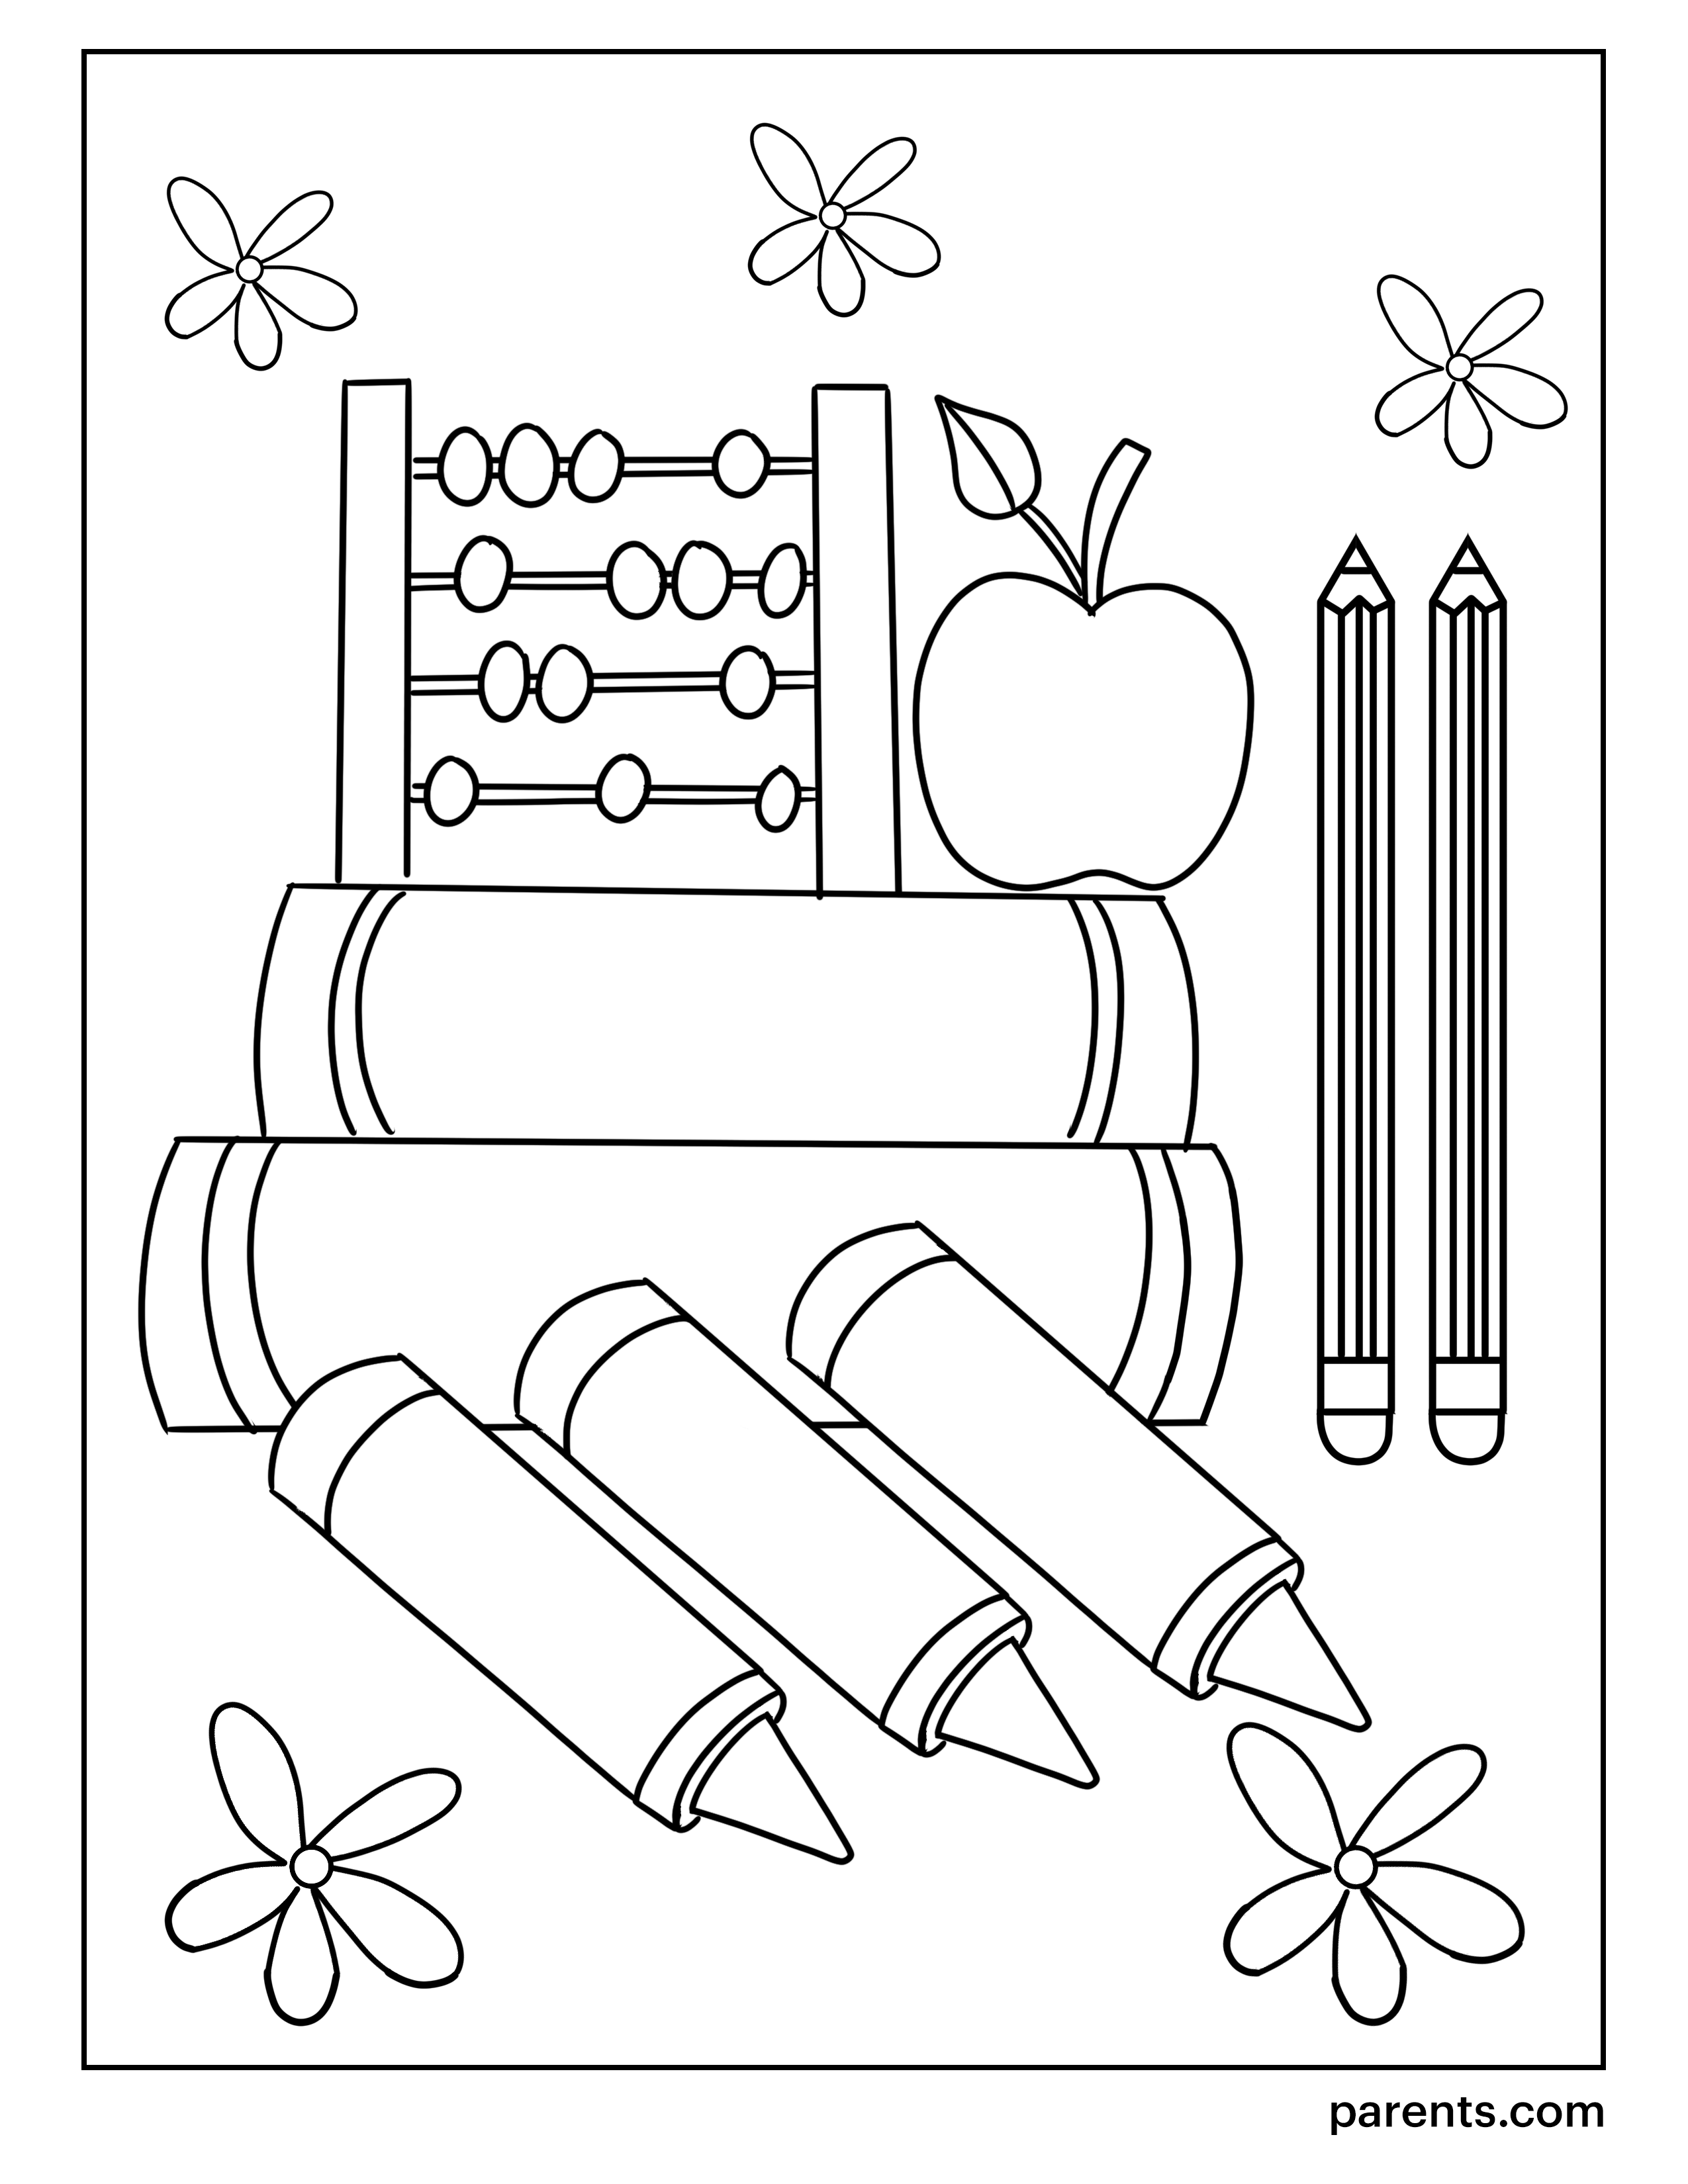 10 Printable Back-to-School Coloring Pages for Kids | Parents